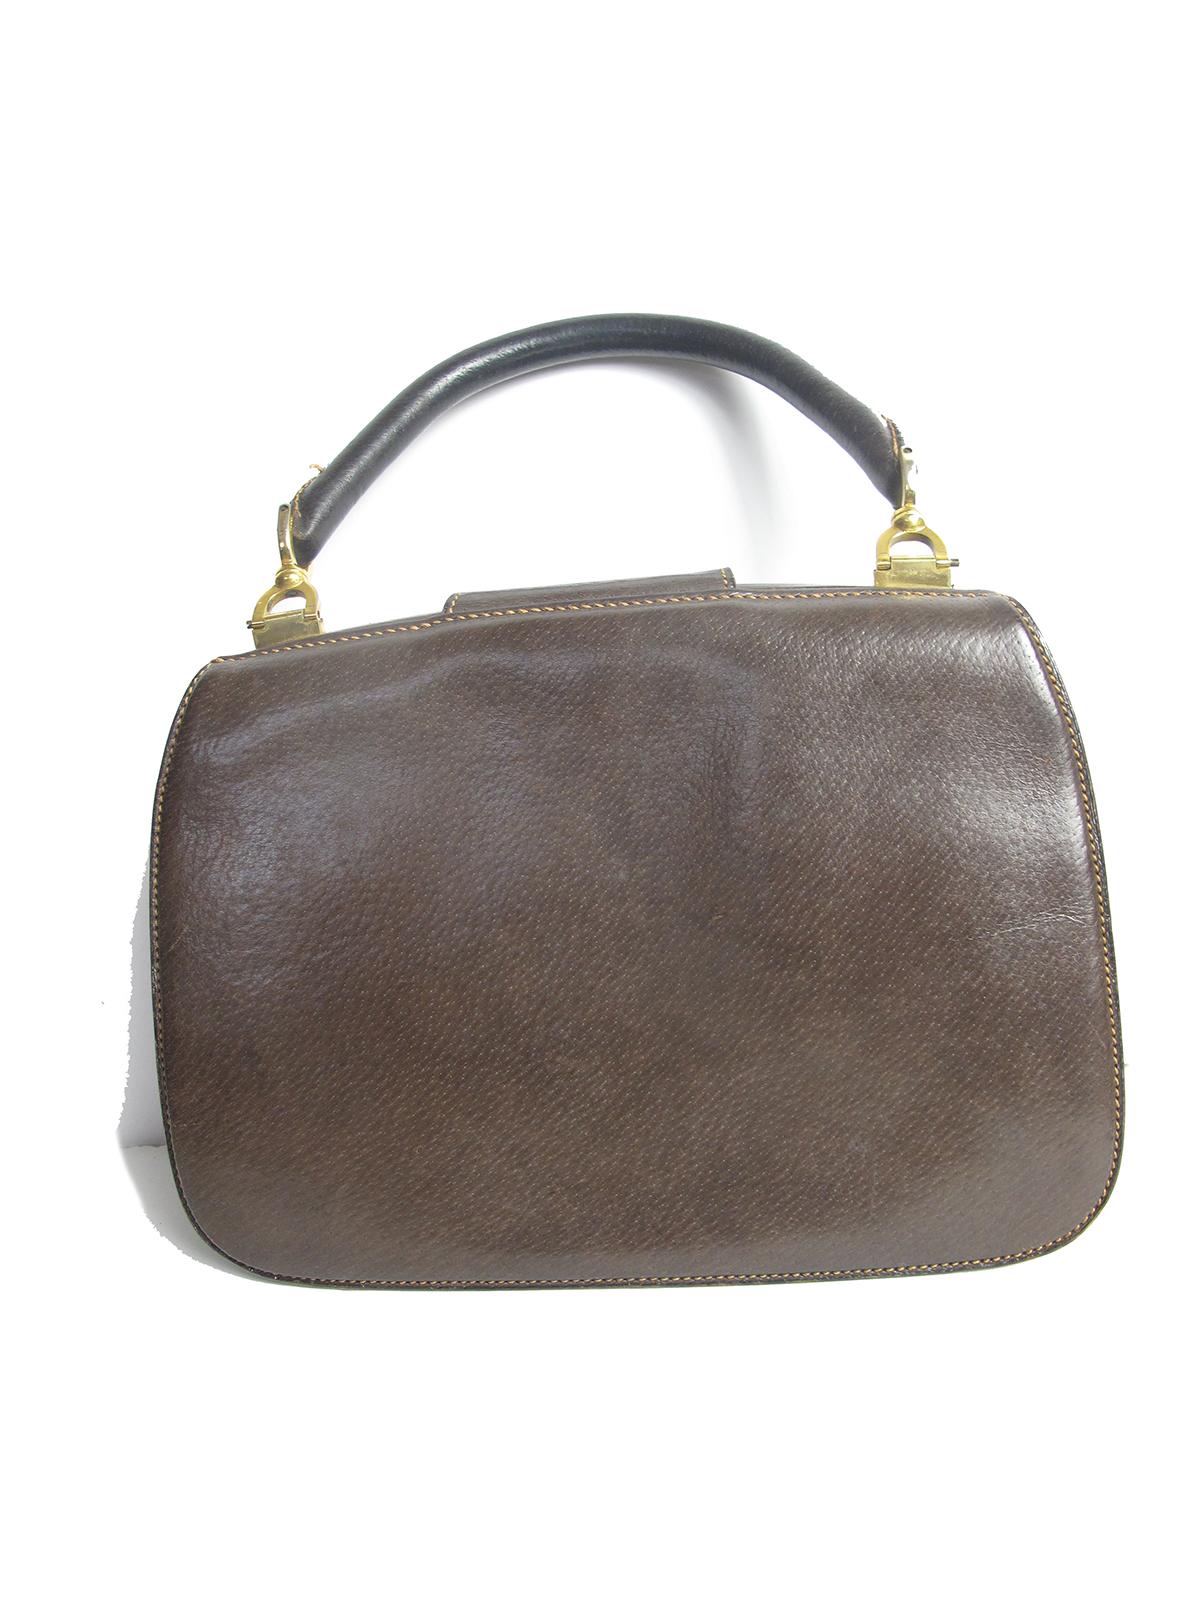 1970s Gucci brown leather frame bag top handle In Excellent Condition In Austin, TX